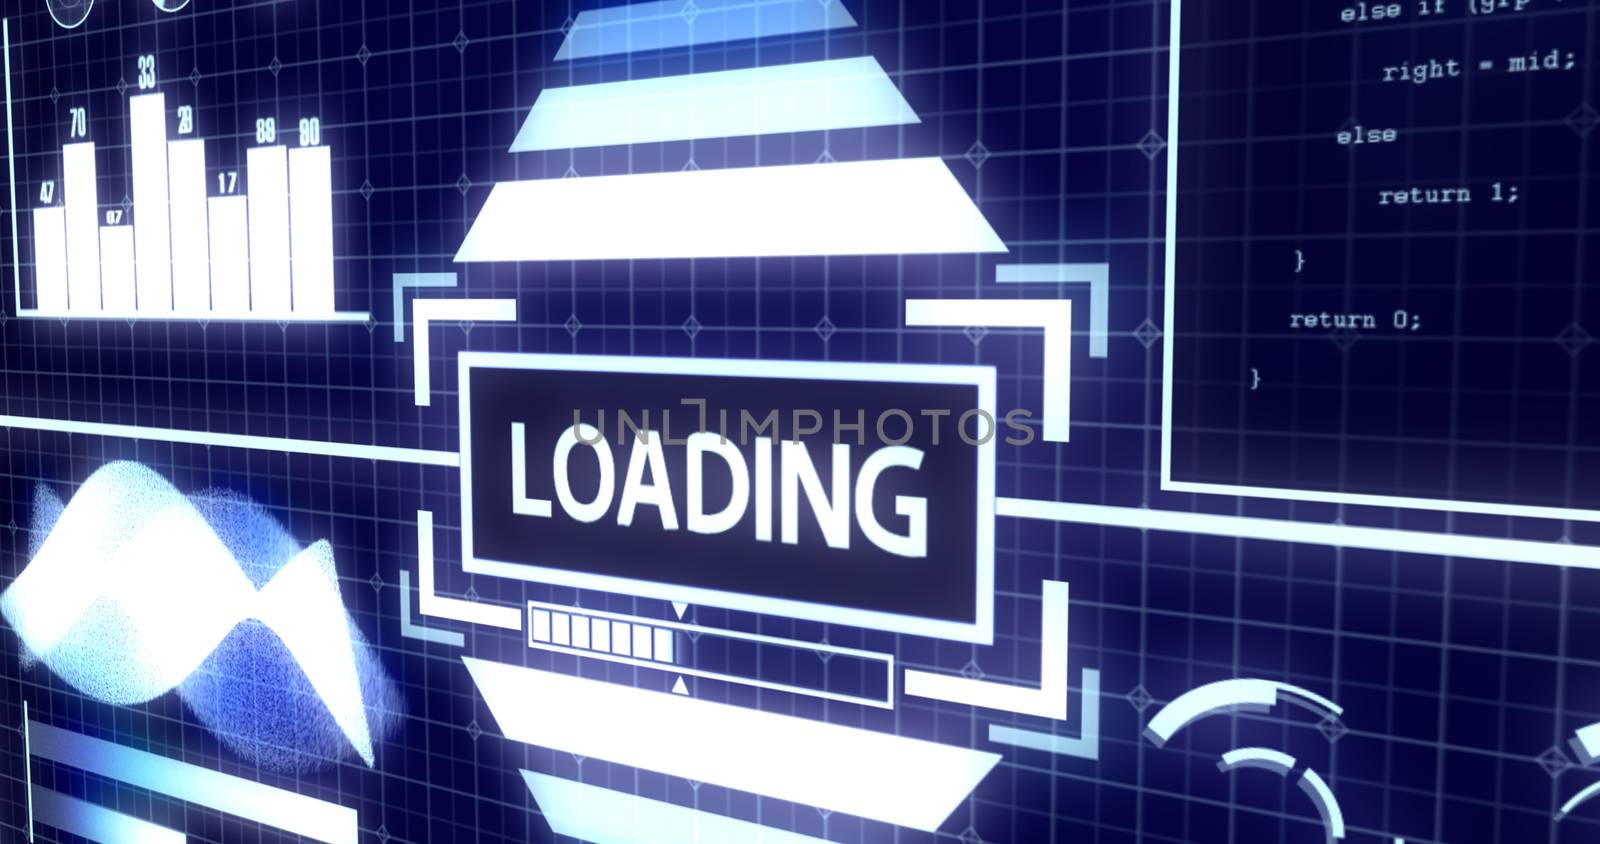 Loading Screen with Process Bar and Digital objects including Soundwave, Graph, Chart, Circles, Radar, Hacker typing and Glowing light bars Ver.3